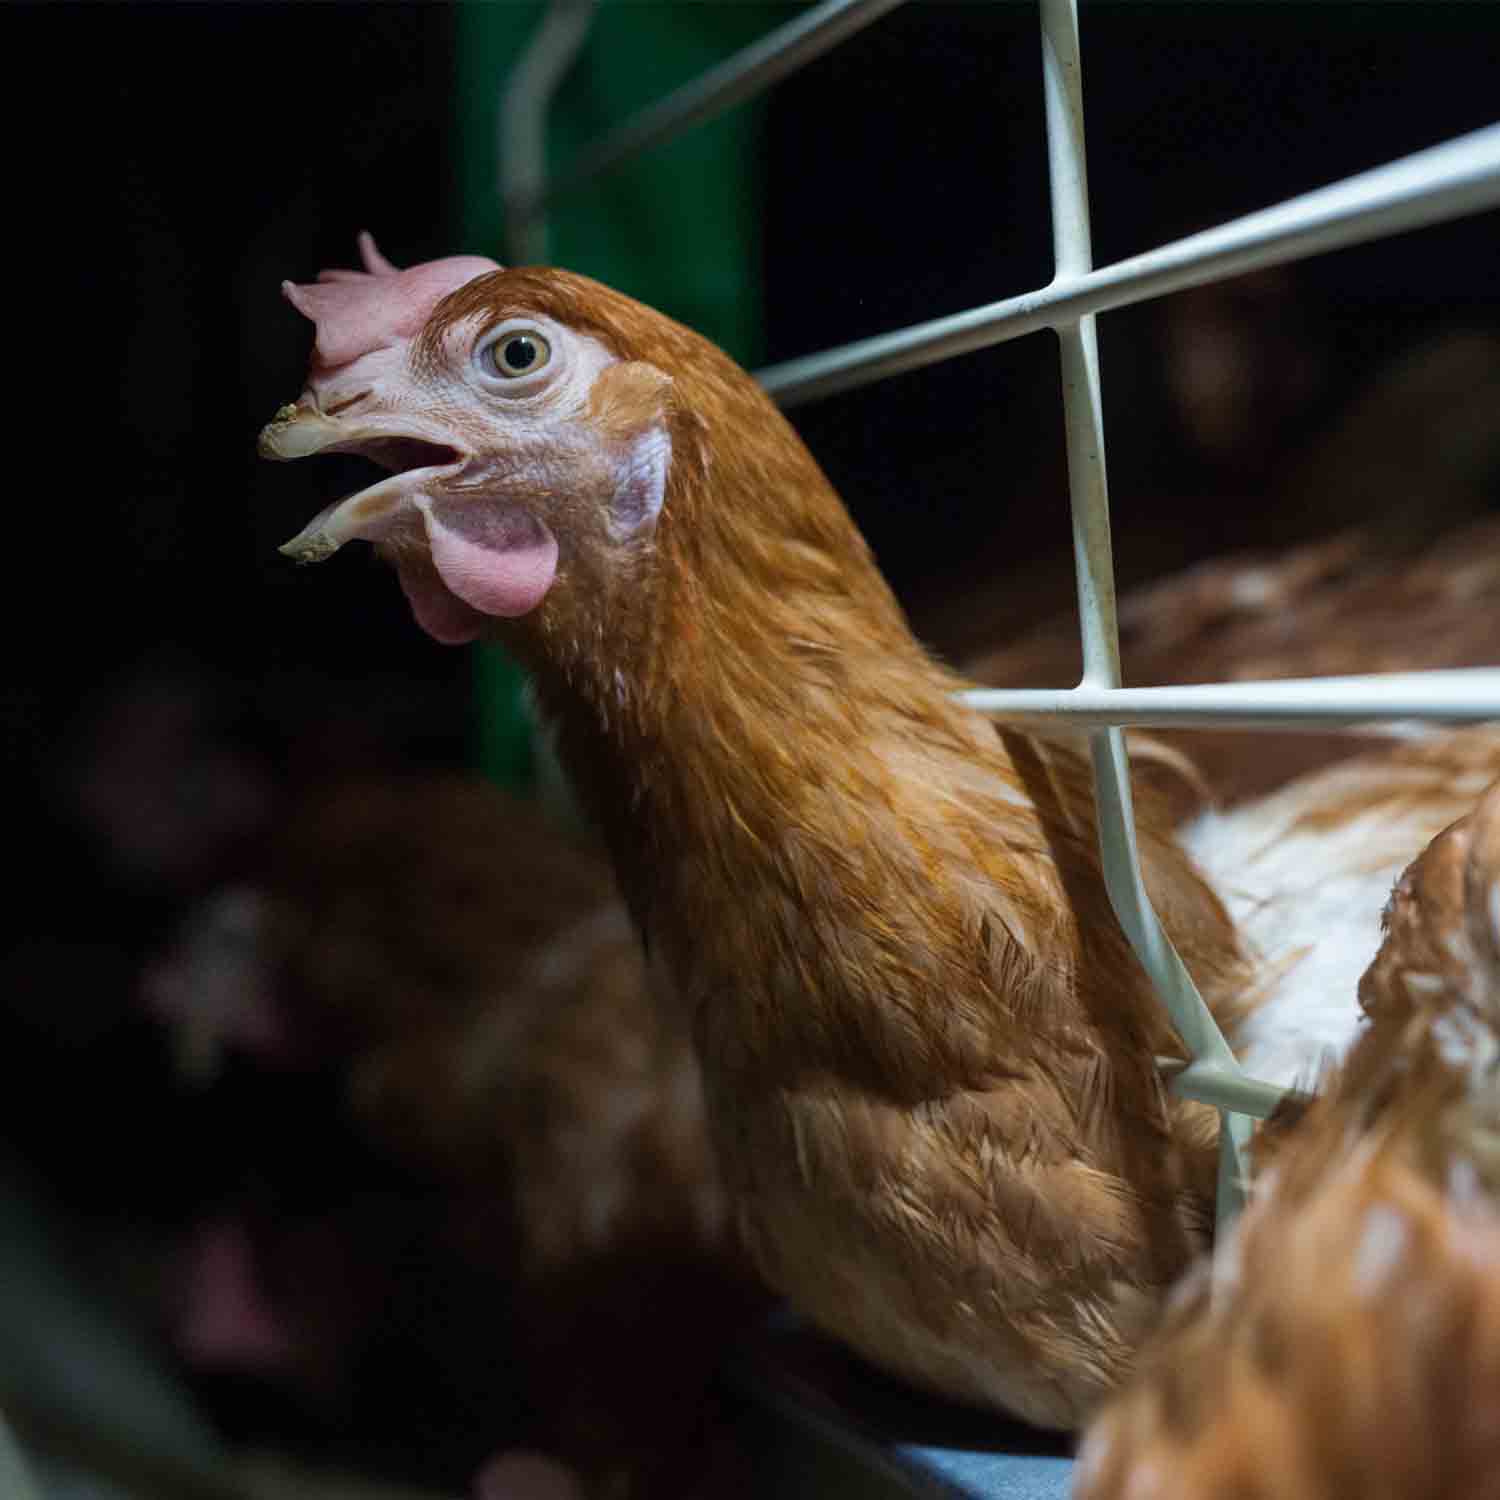 Animal Equality Demands An End to Cages for Animals Worldwide